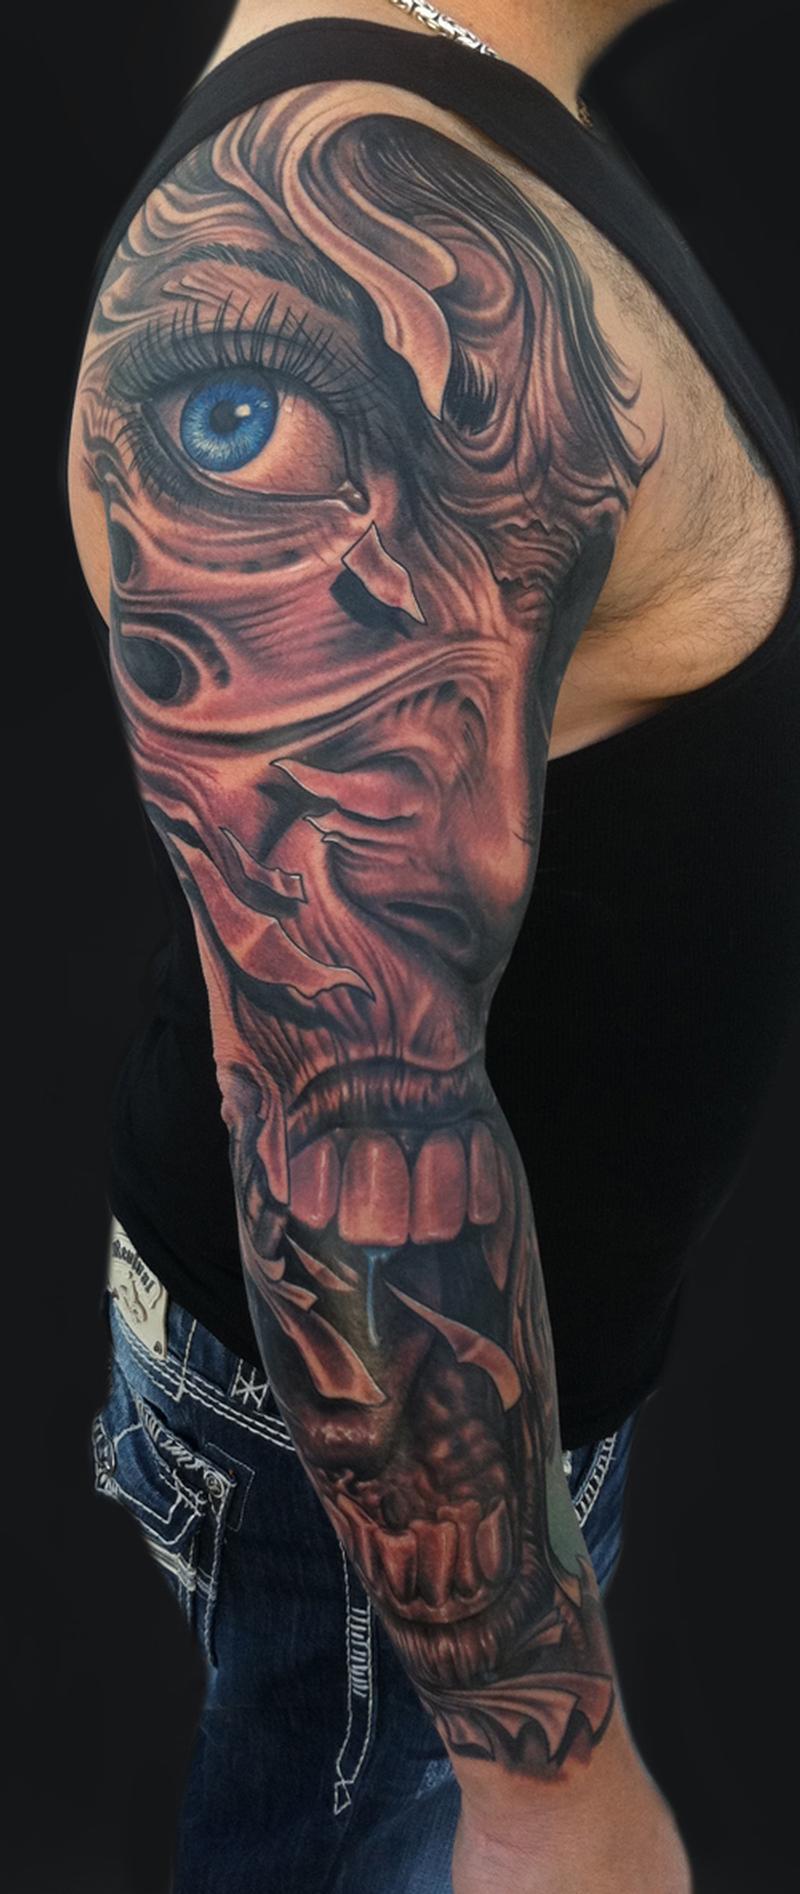 Mike DeVries : Tattoos : Black and Gray : Face Sleeve